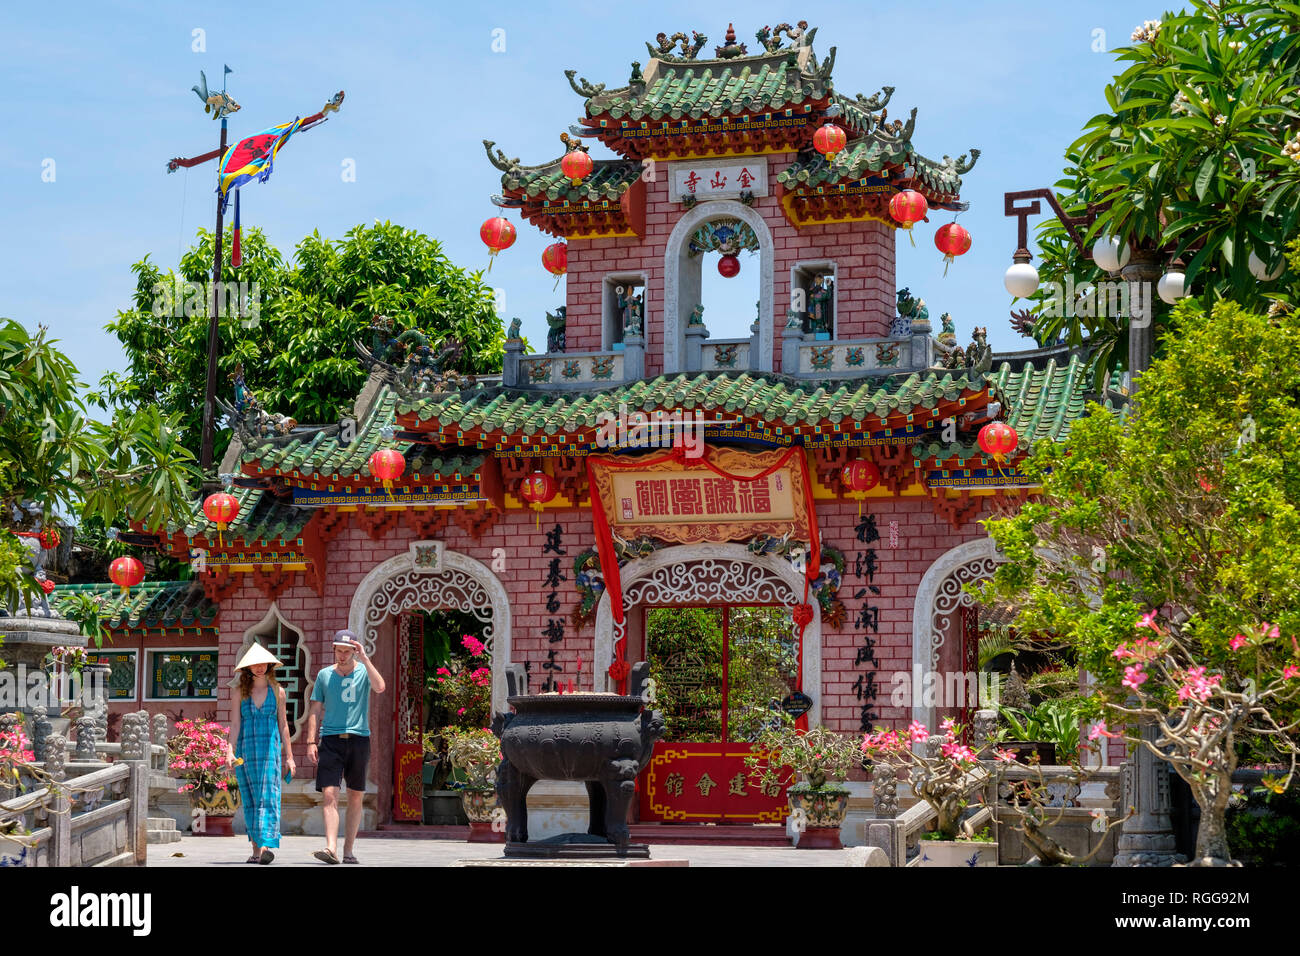 Phuc Kien Fukienchinese Congregation Assembly Hall Of Fujian Chinese in old town Hoi An, Vietnam Stock Photo